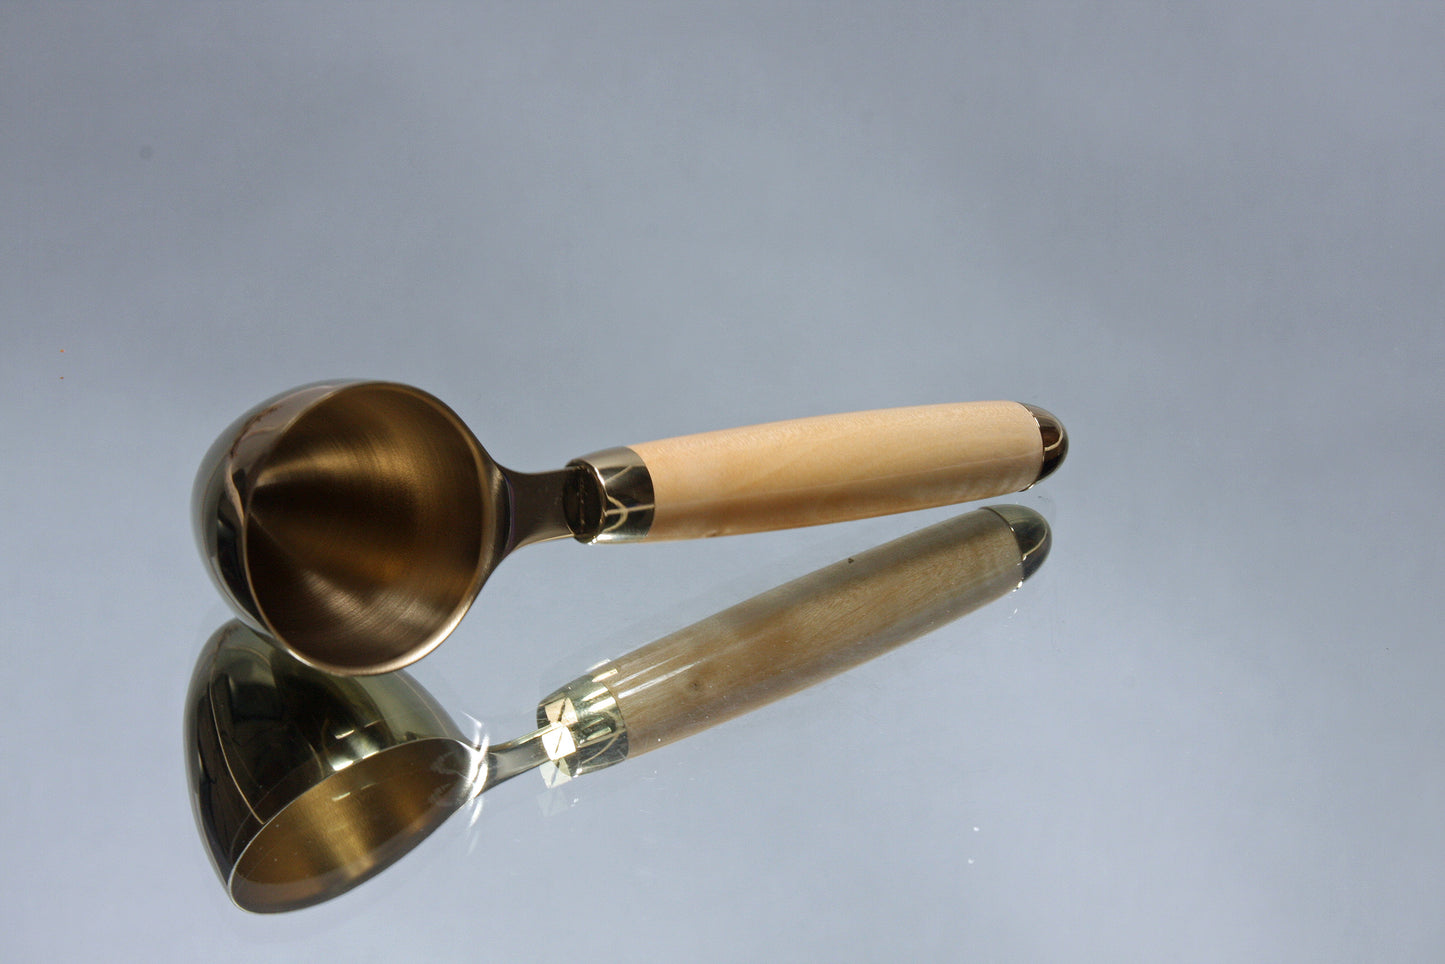 Handcrafted Gold TN-Plated Coffee Scoop - 2oz Capacity - Cottonwood Handle